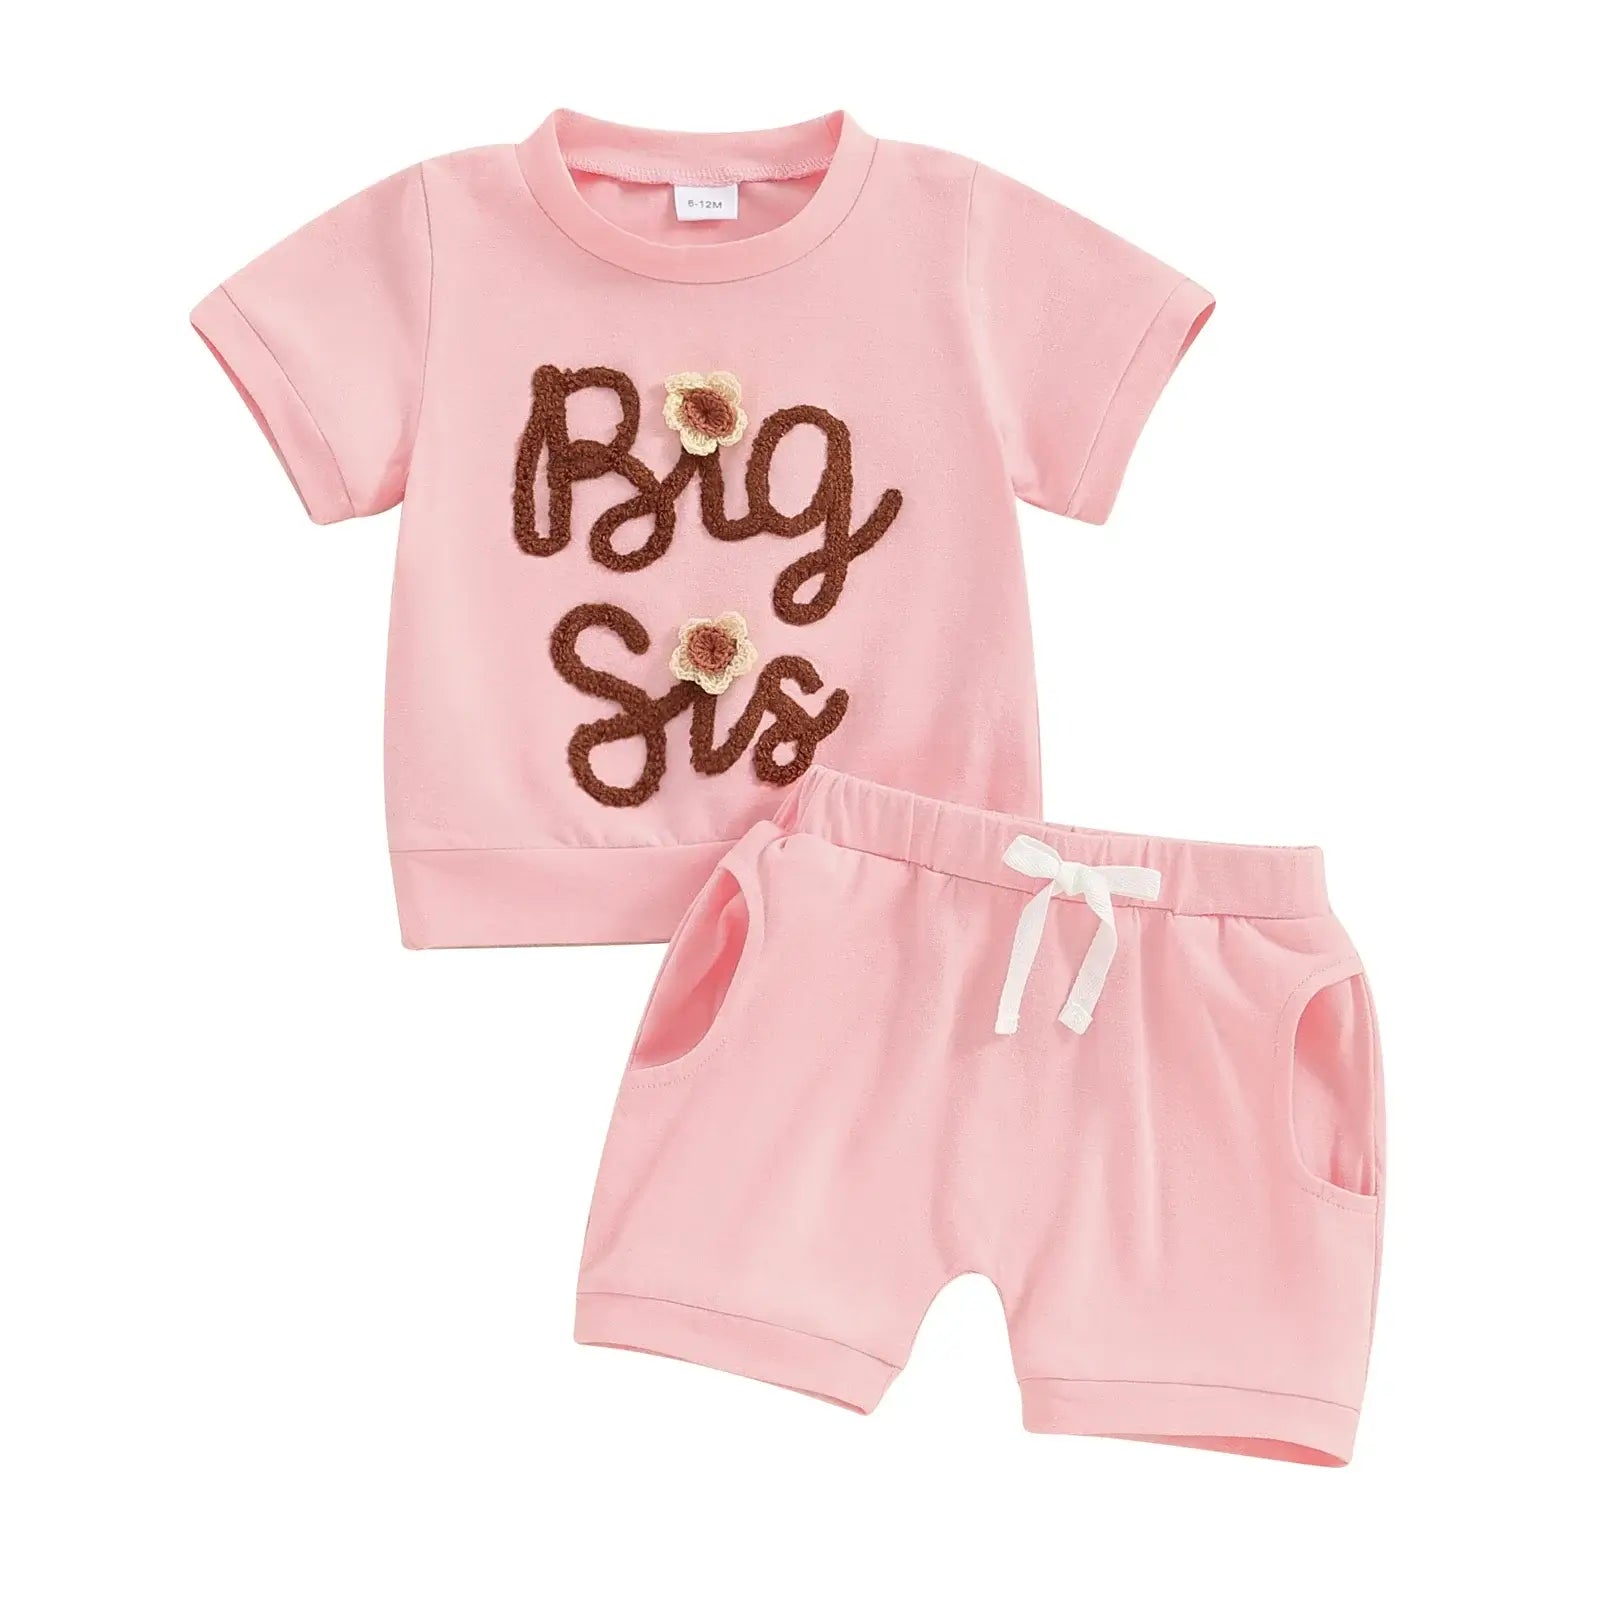 Big Sis Pink Shorts Set | The Perfect Big Sister Outfit - Lulu Babe